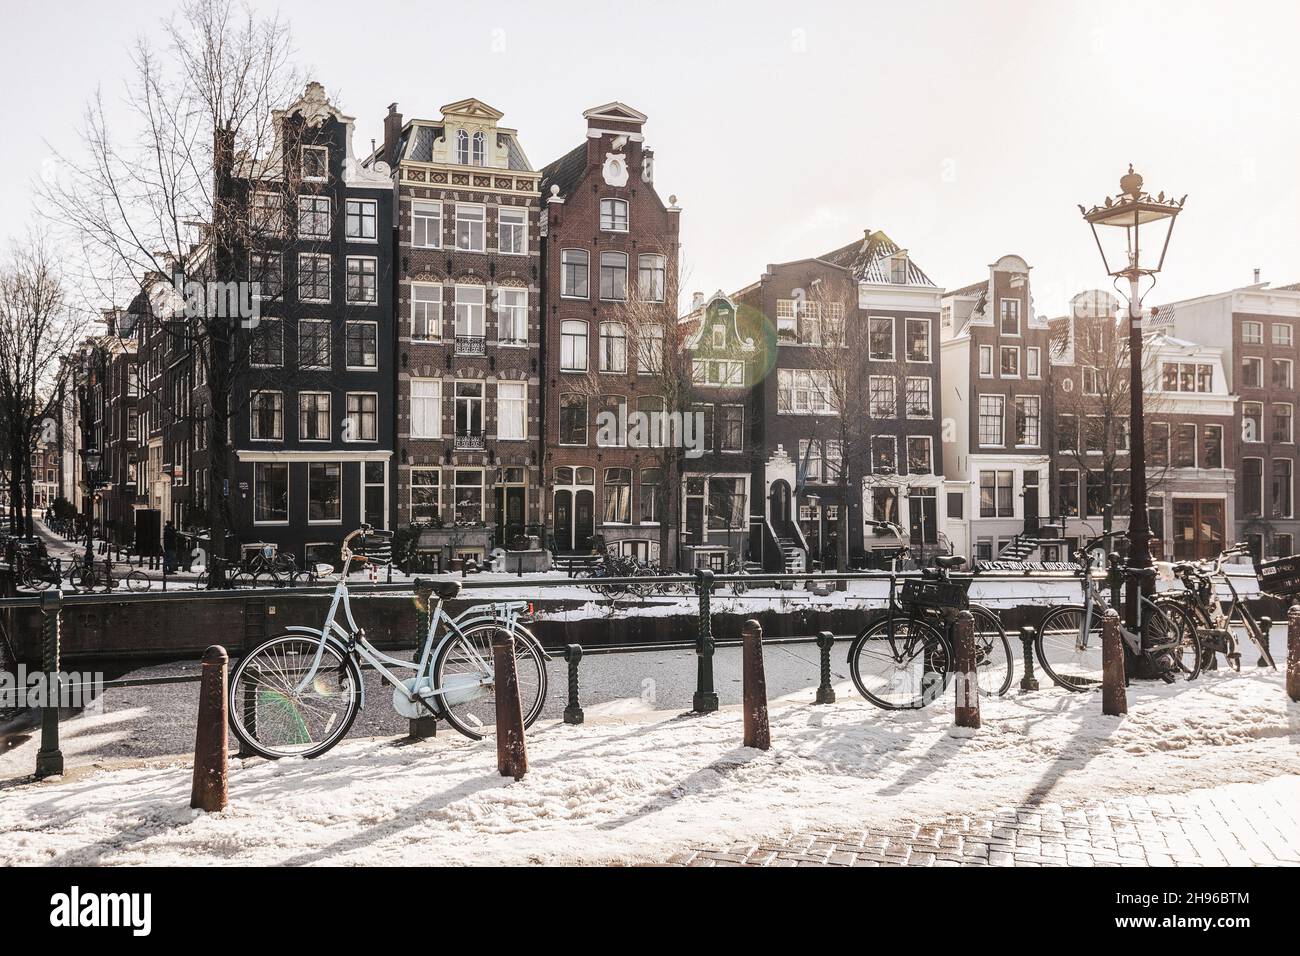 Amsterdam, Netherlands, February 12, 2021: Amsterdam in the Netherlands in winter. Stock Photo